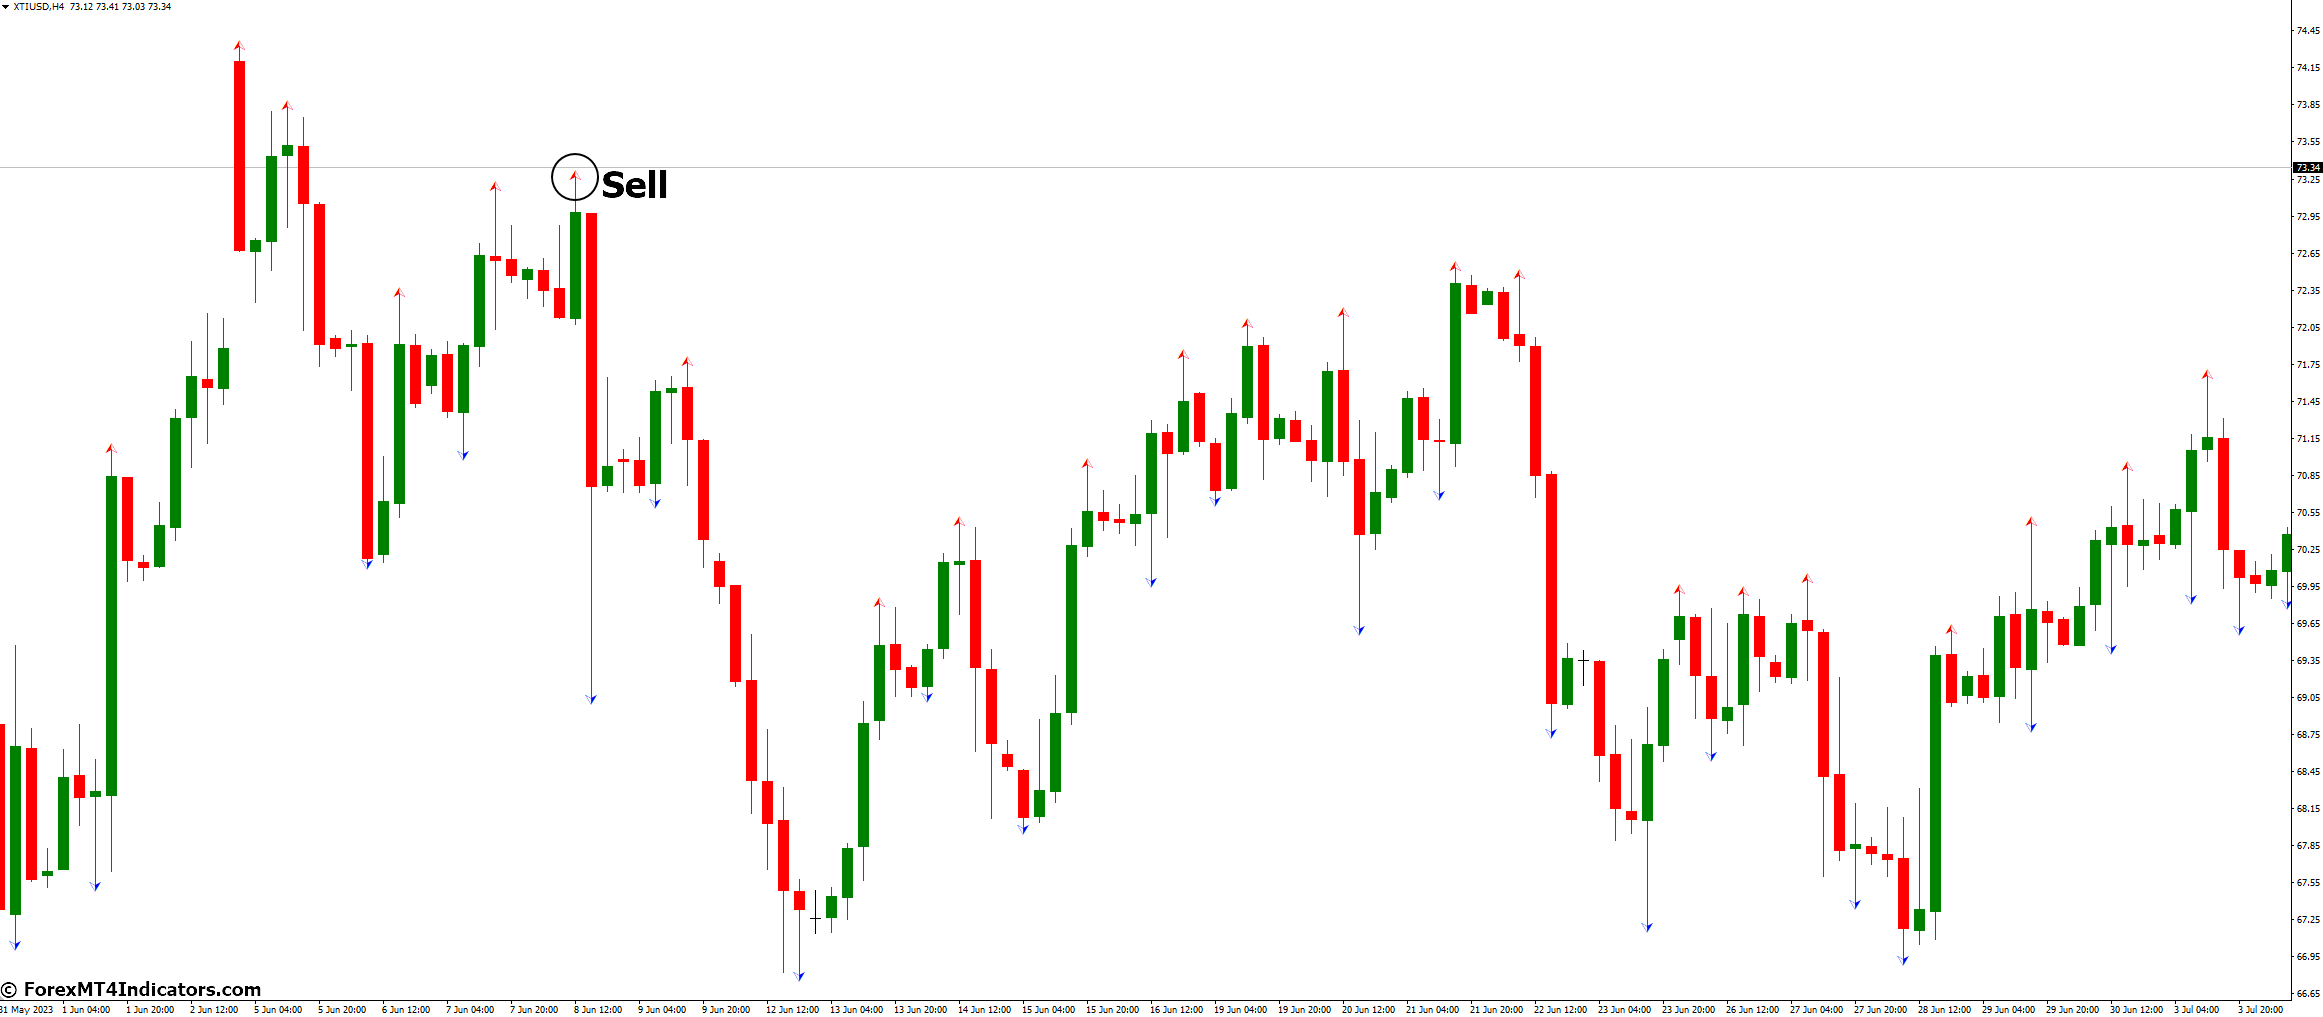 How to Trade with Fractals Indicator - Sell Entry